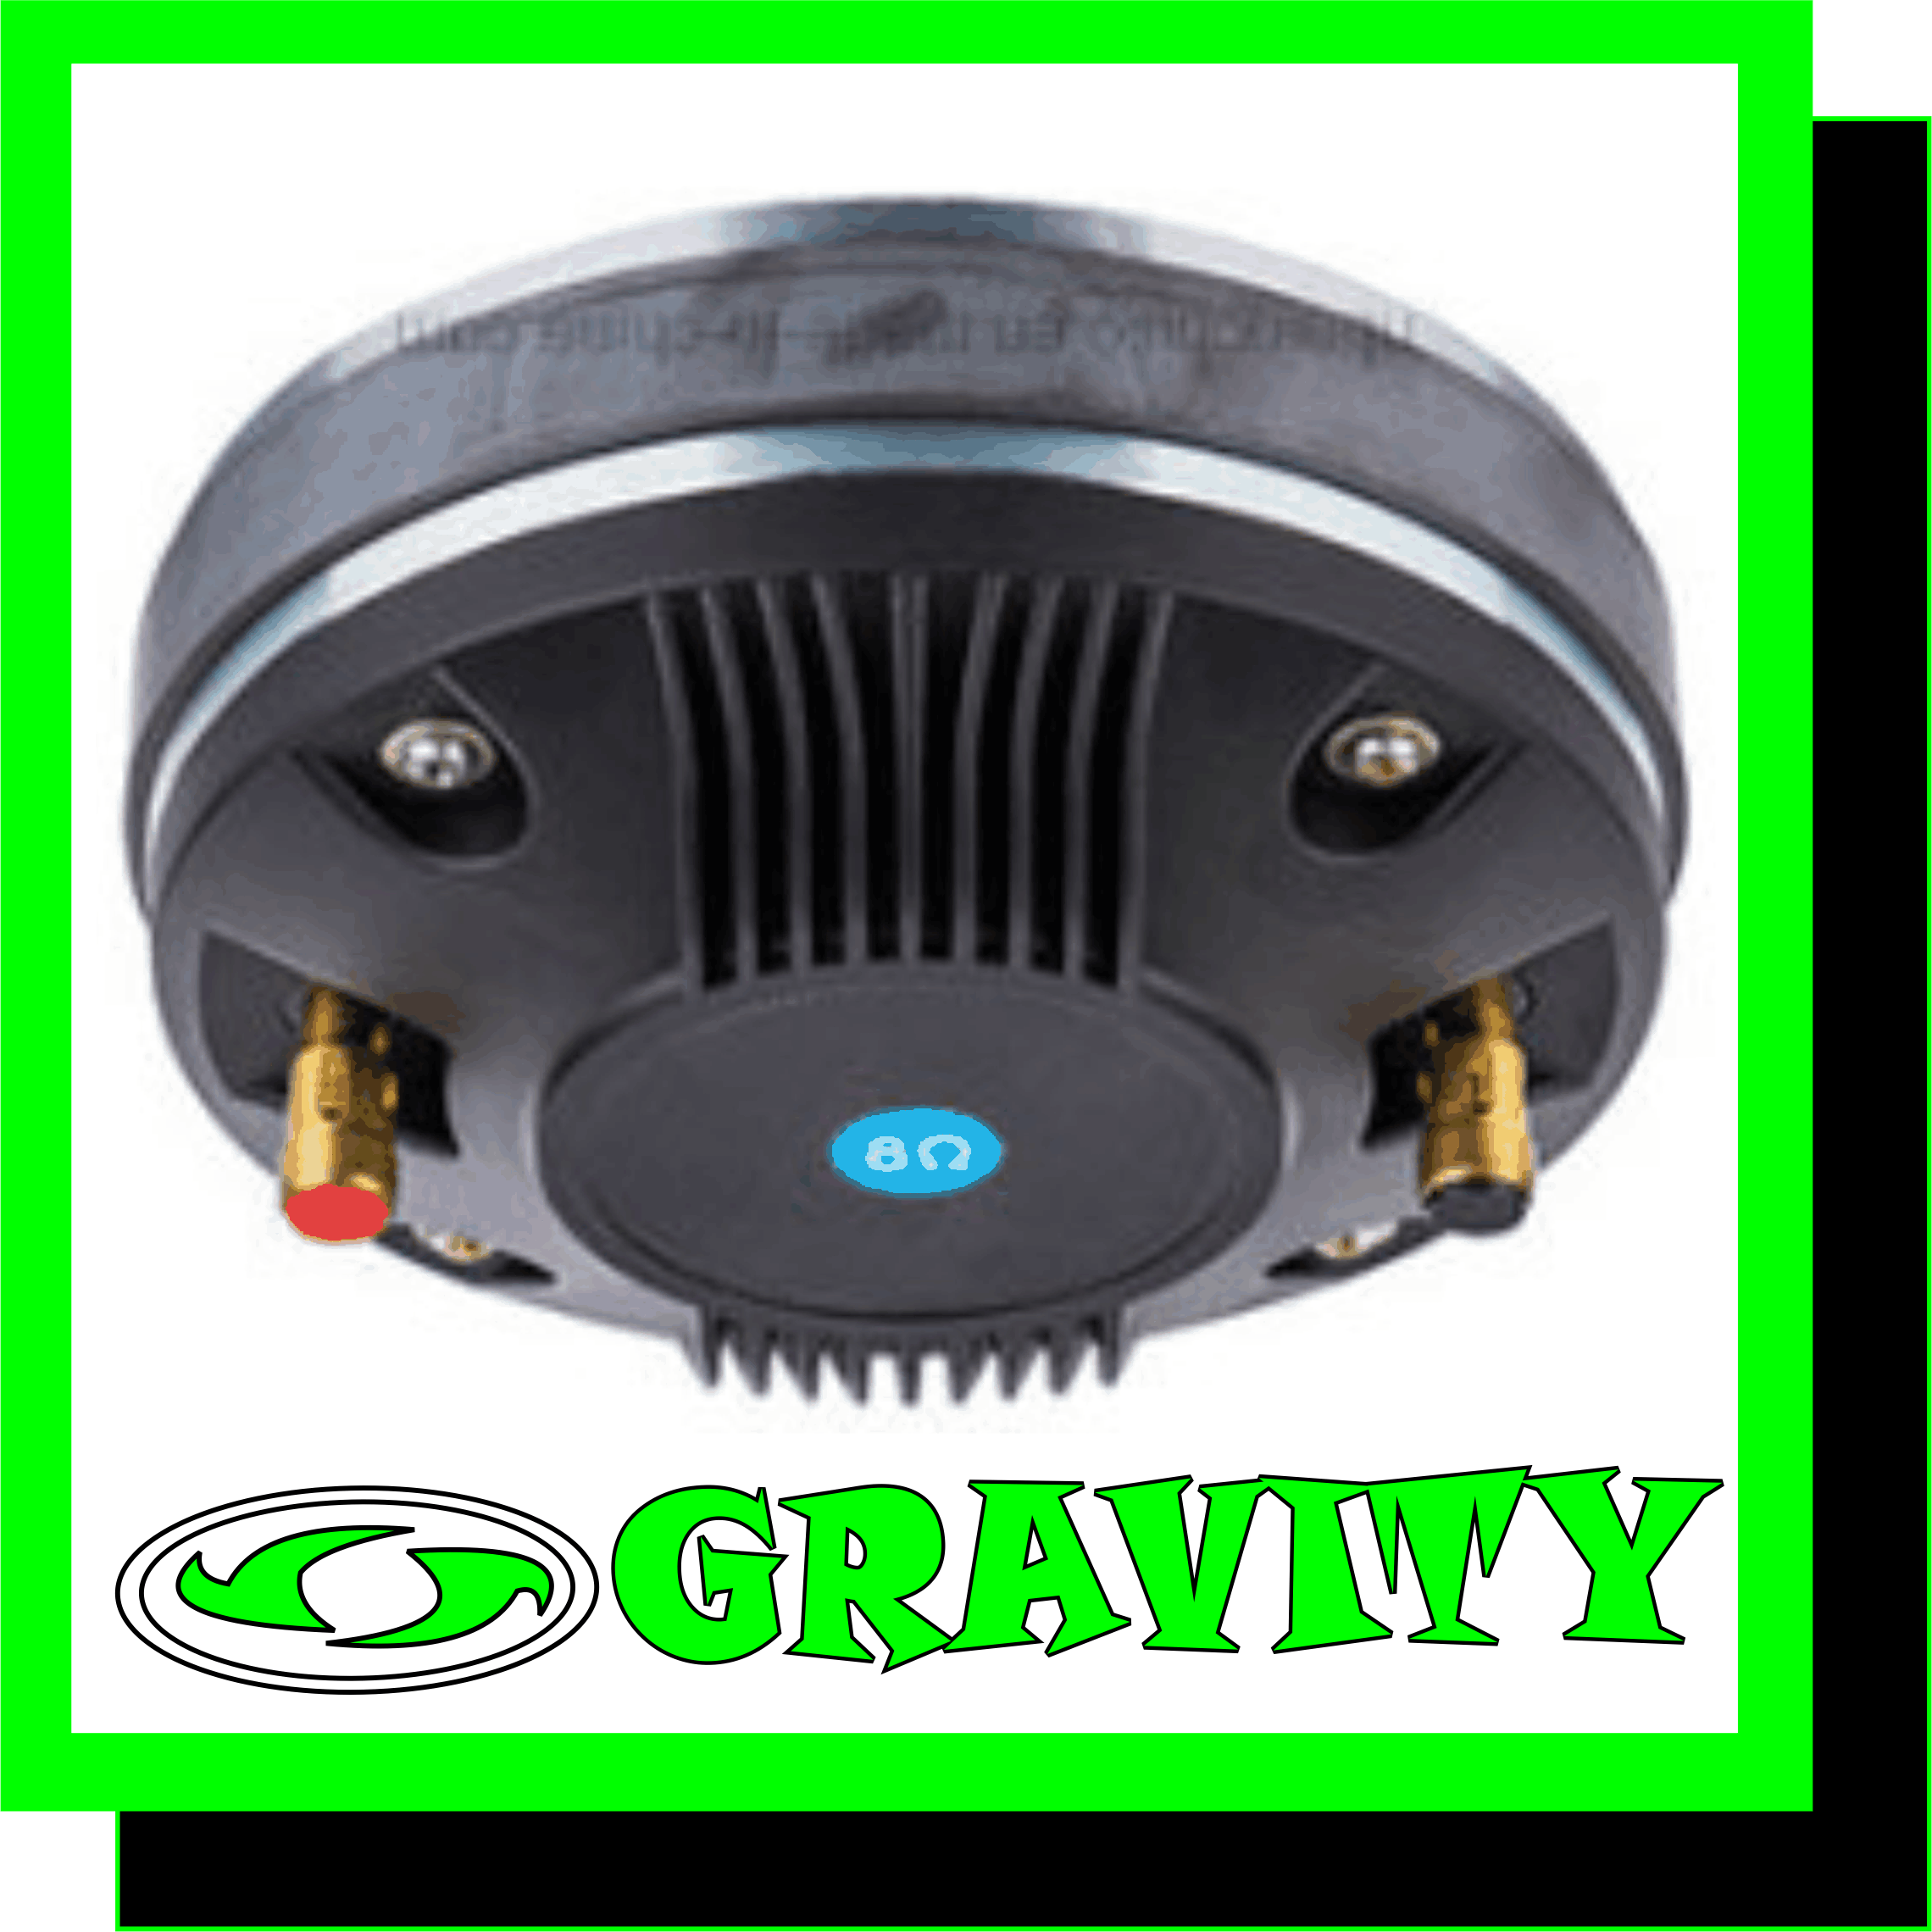 120w 50mm compression super tweeter replacement drivers JBL samson wharfedale citronic peavey replacement tweeter drivers gravity dj store 0315072463